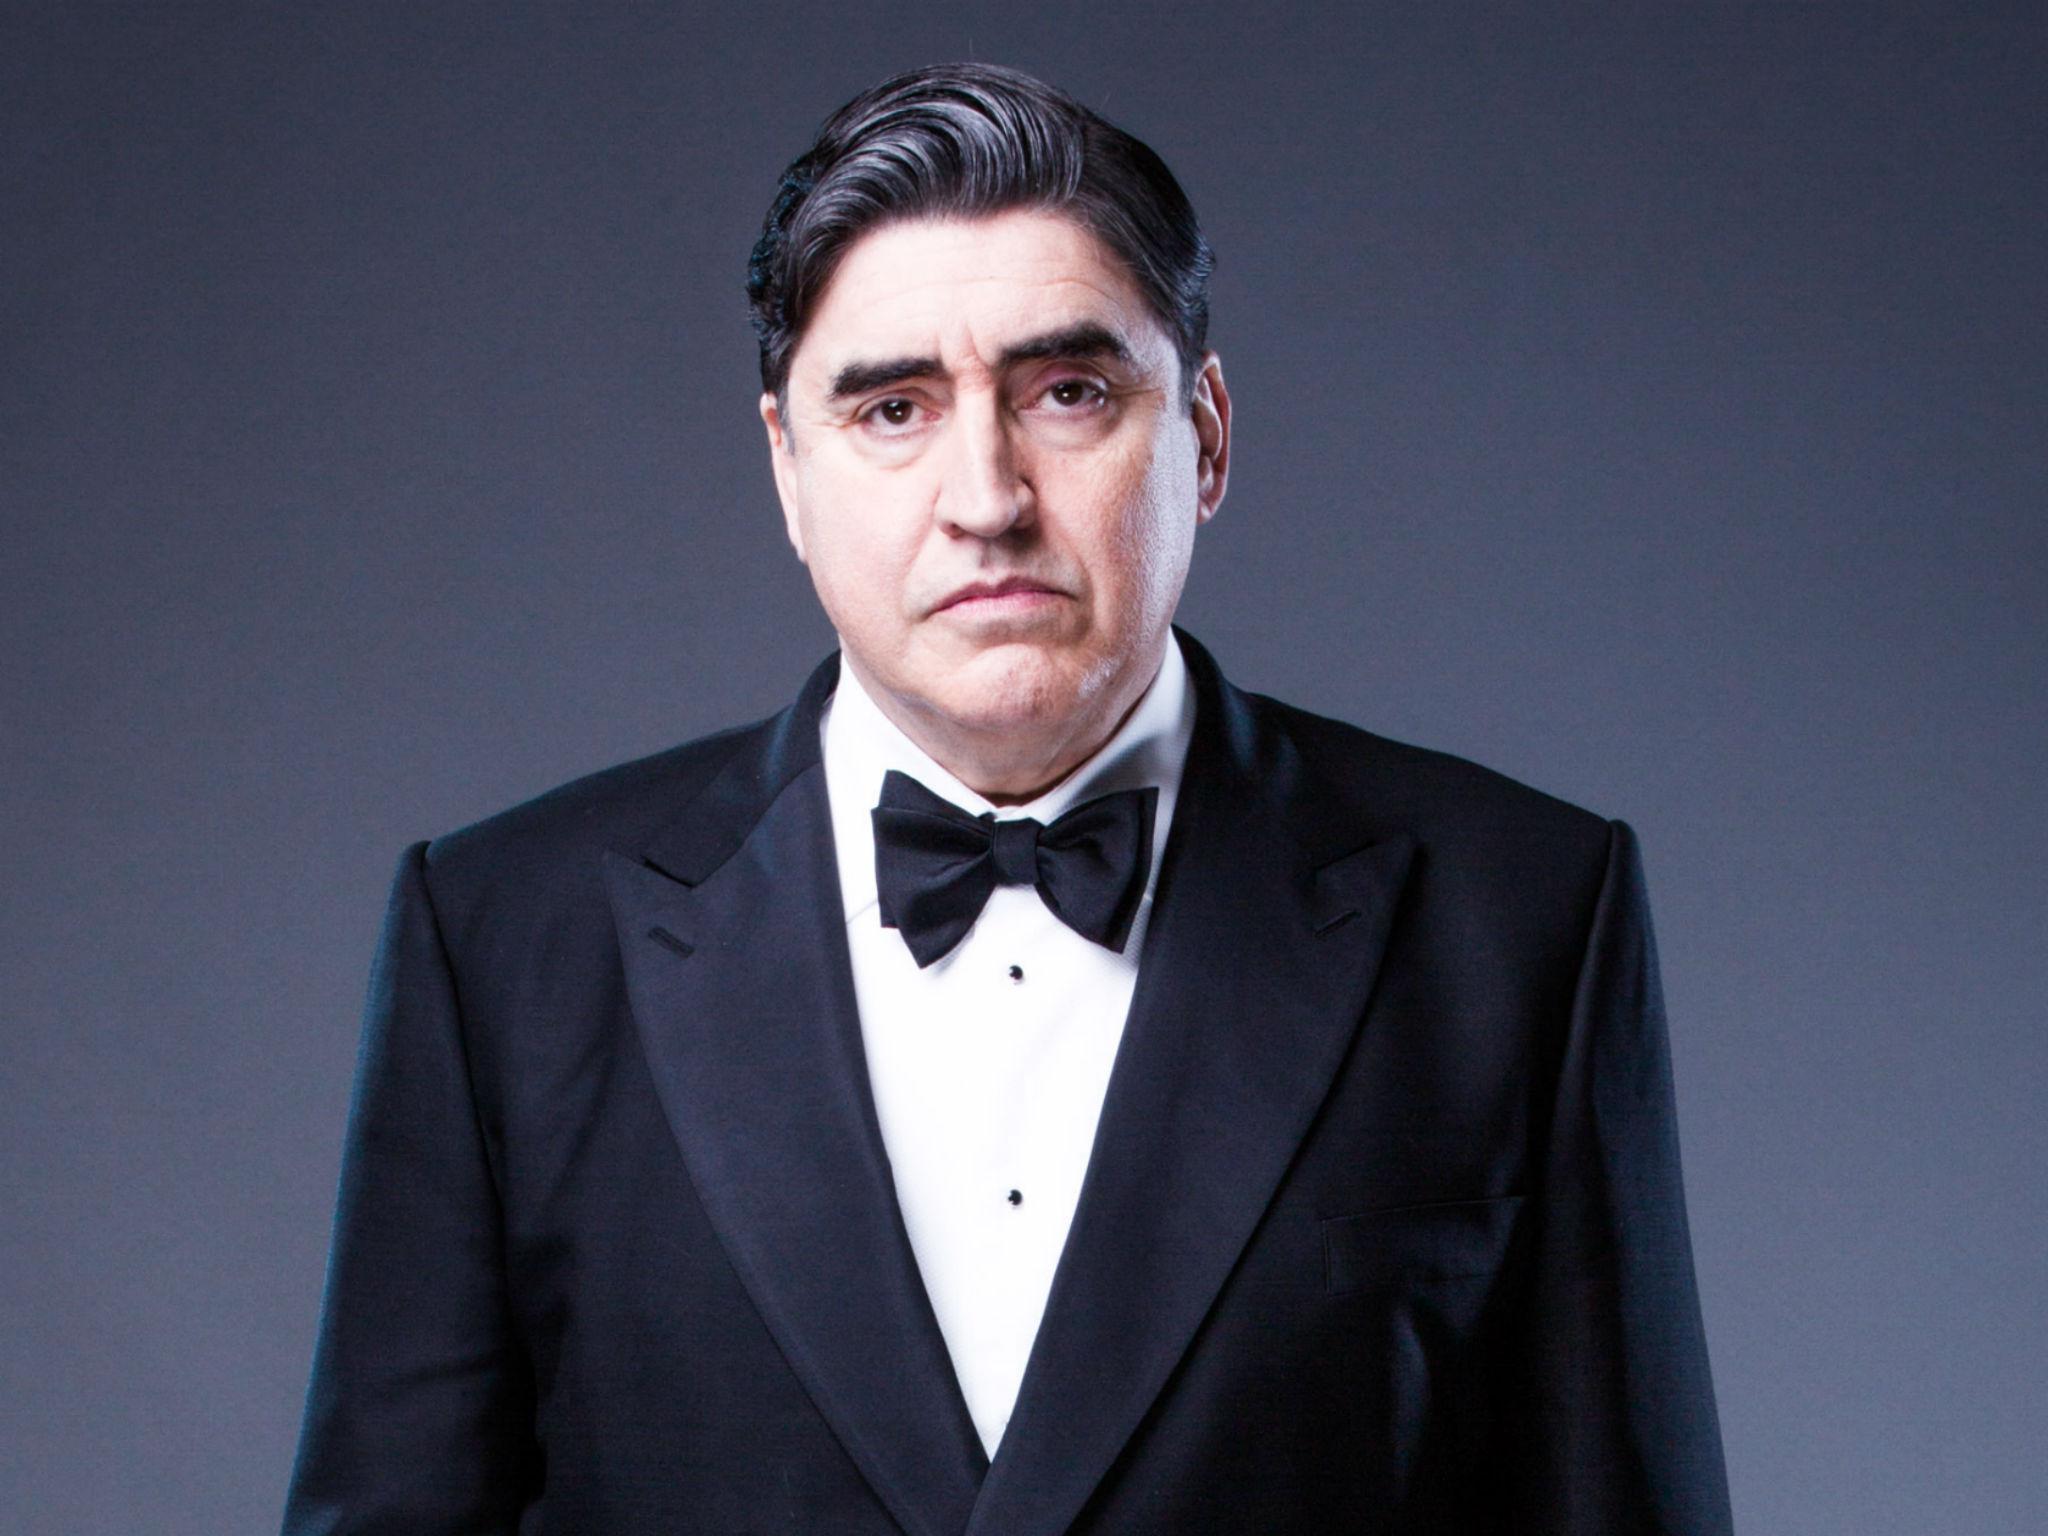 Actor Alfredo “Alfred” Molina (b. 1953), known for his roles in “Raiders of the Lost Ark” and “Luther”